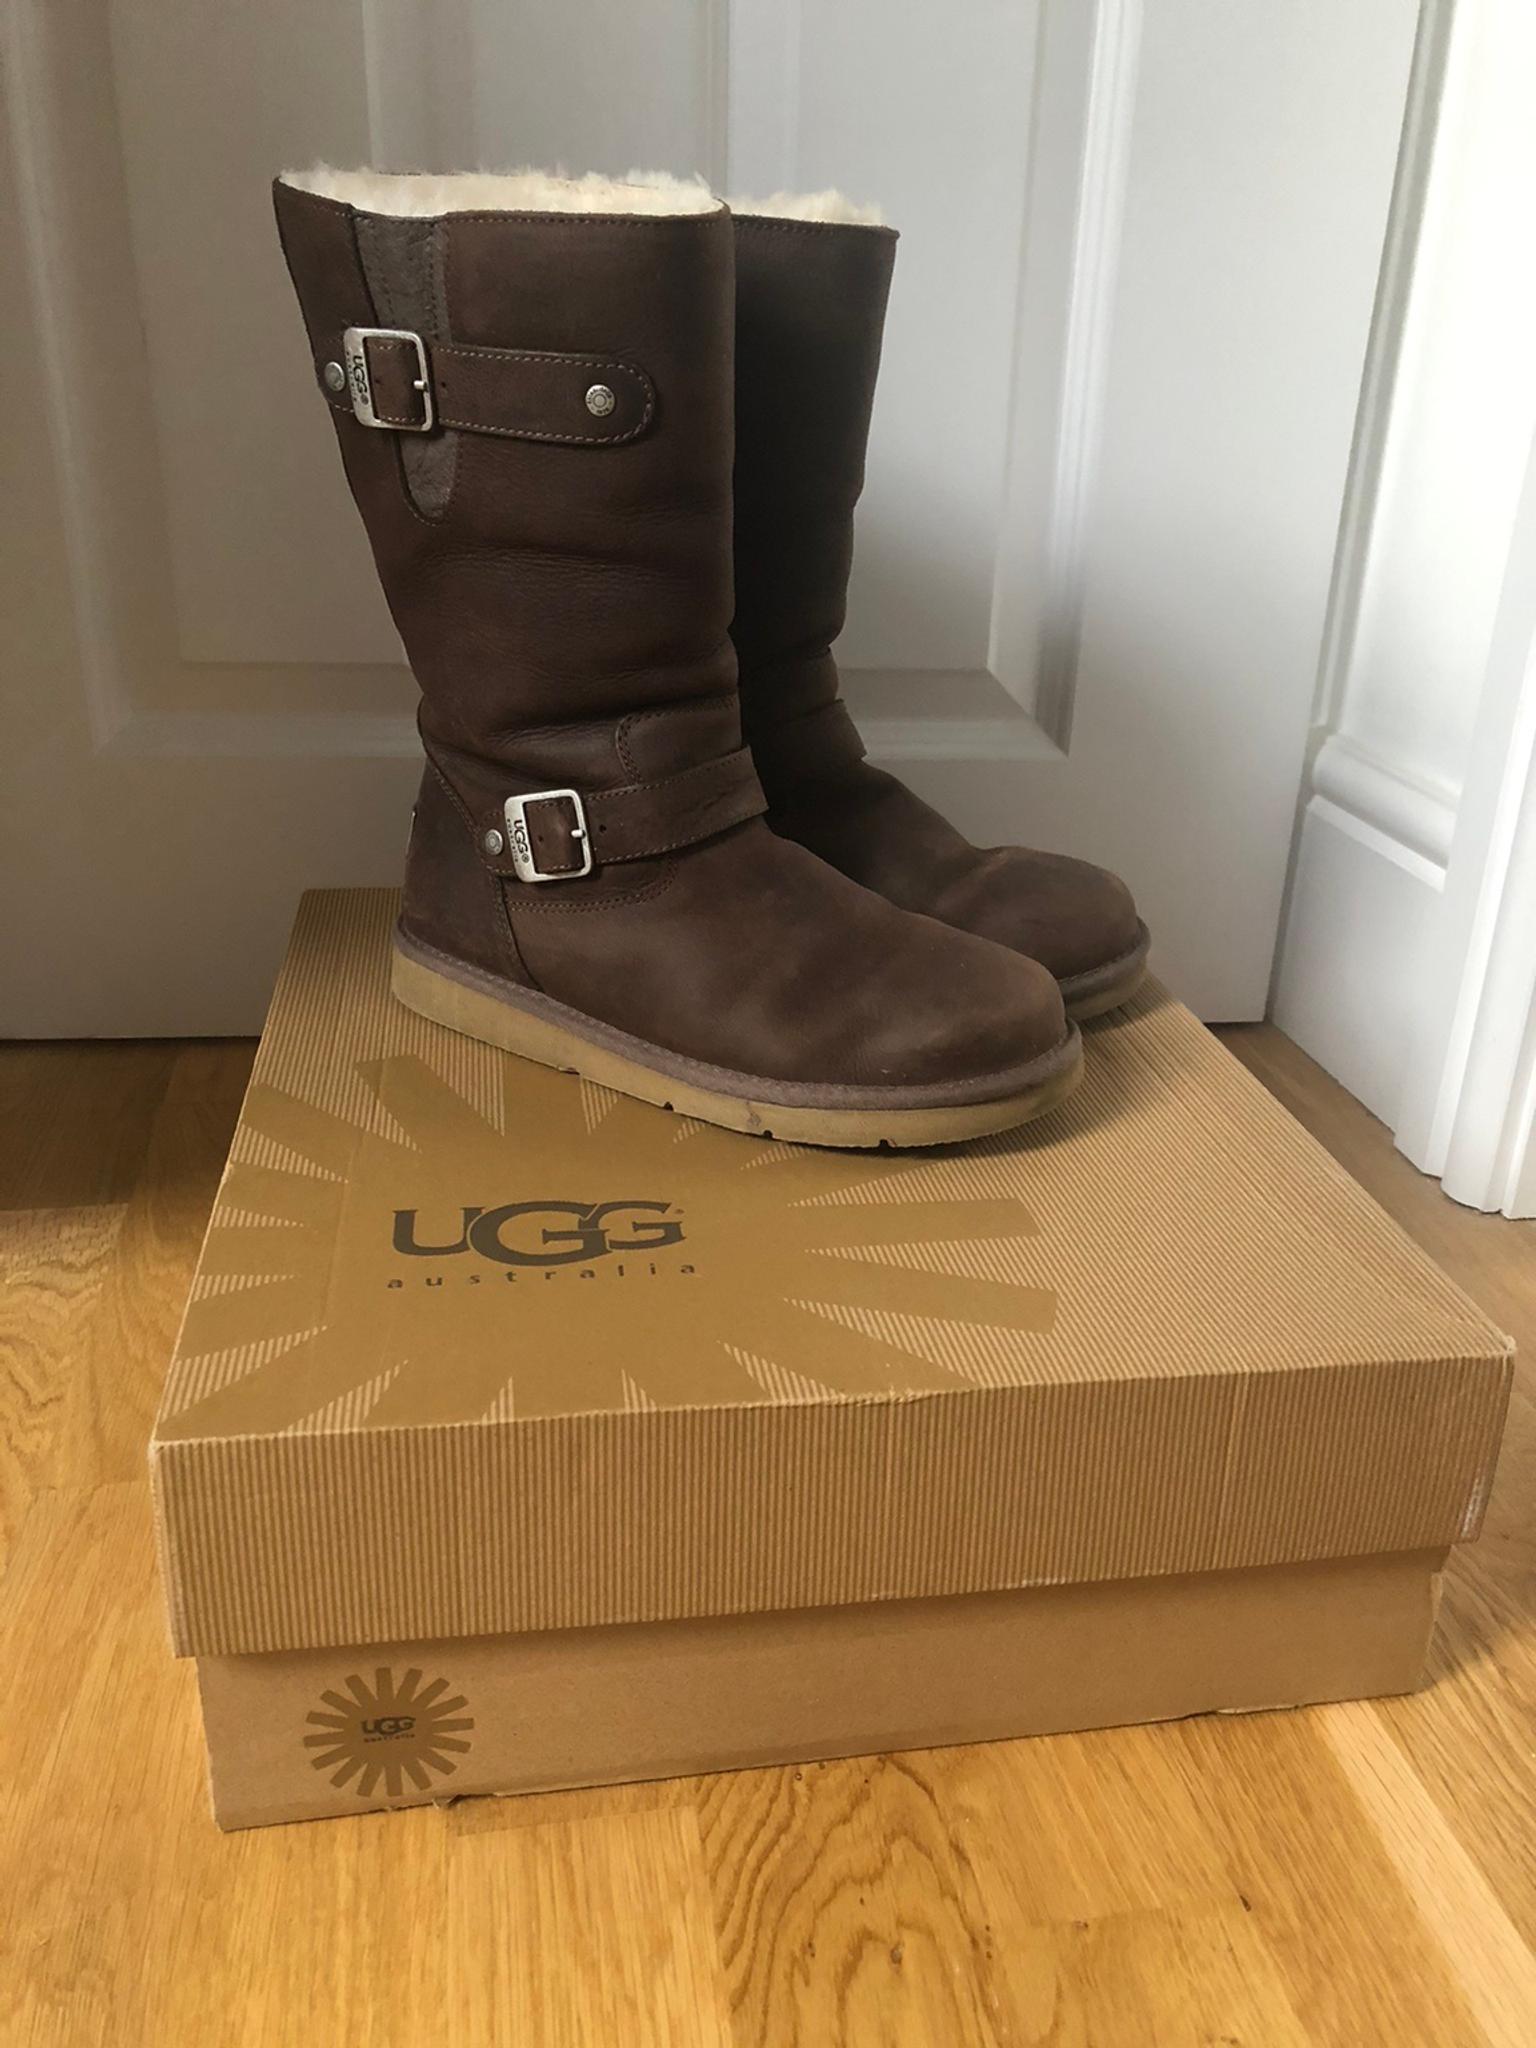 ladies ugg boots size 8